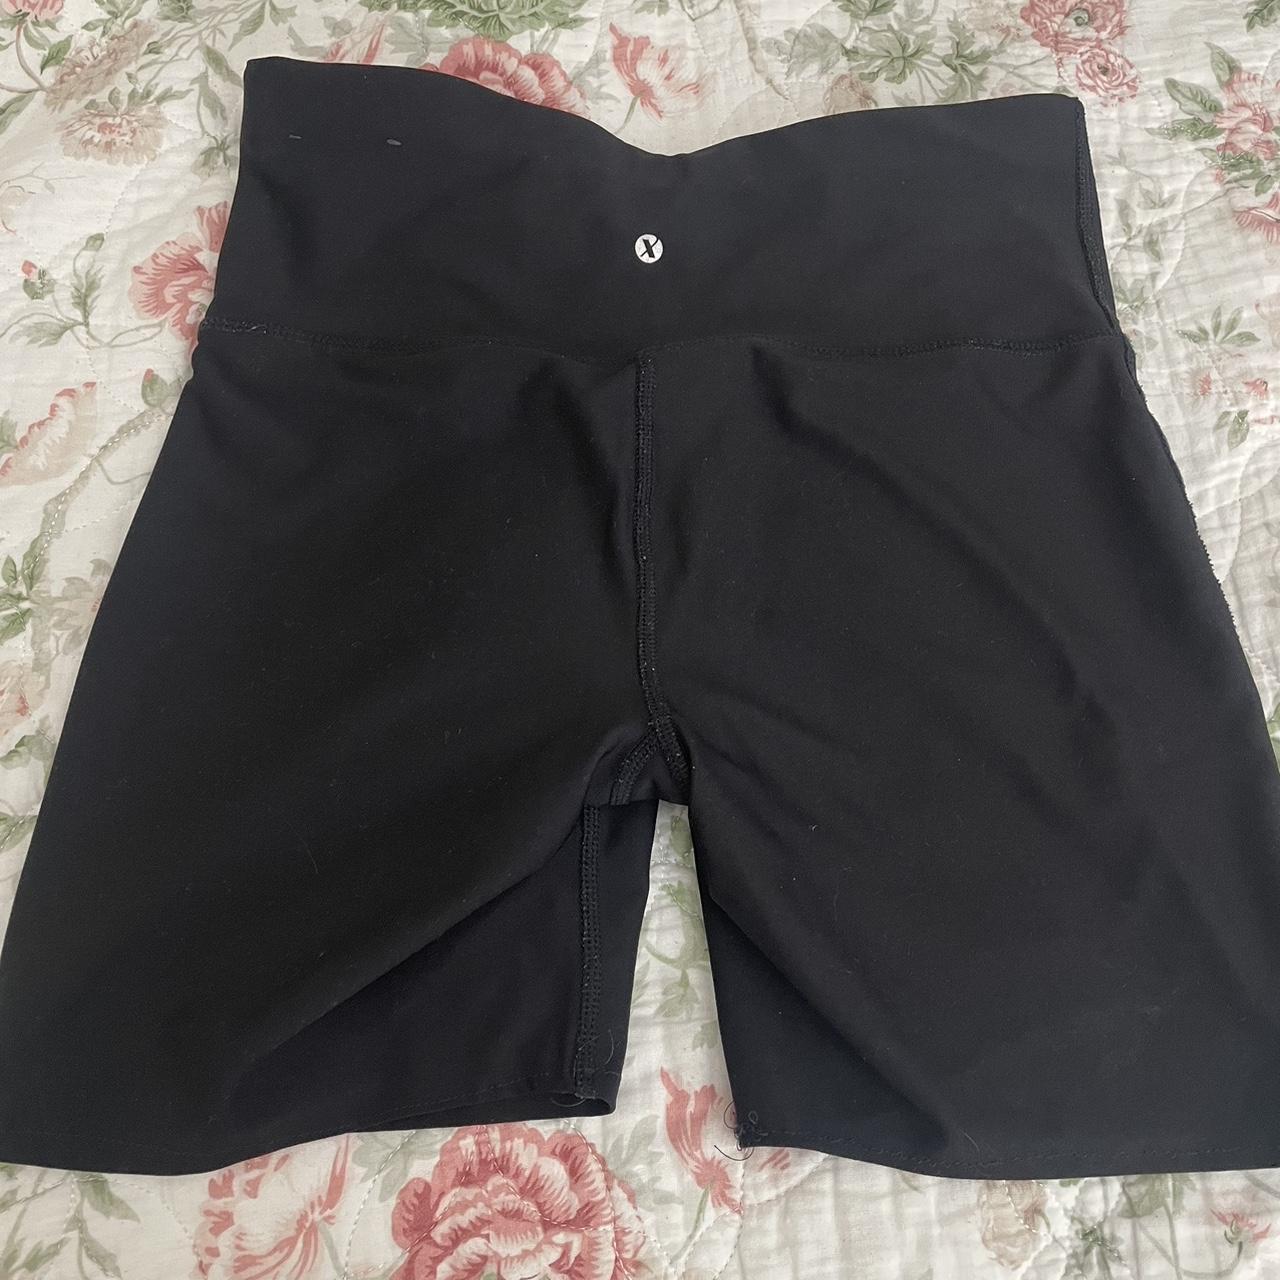 Xersion Performance high waisted biker shorts with - Depop